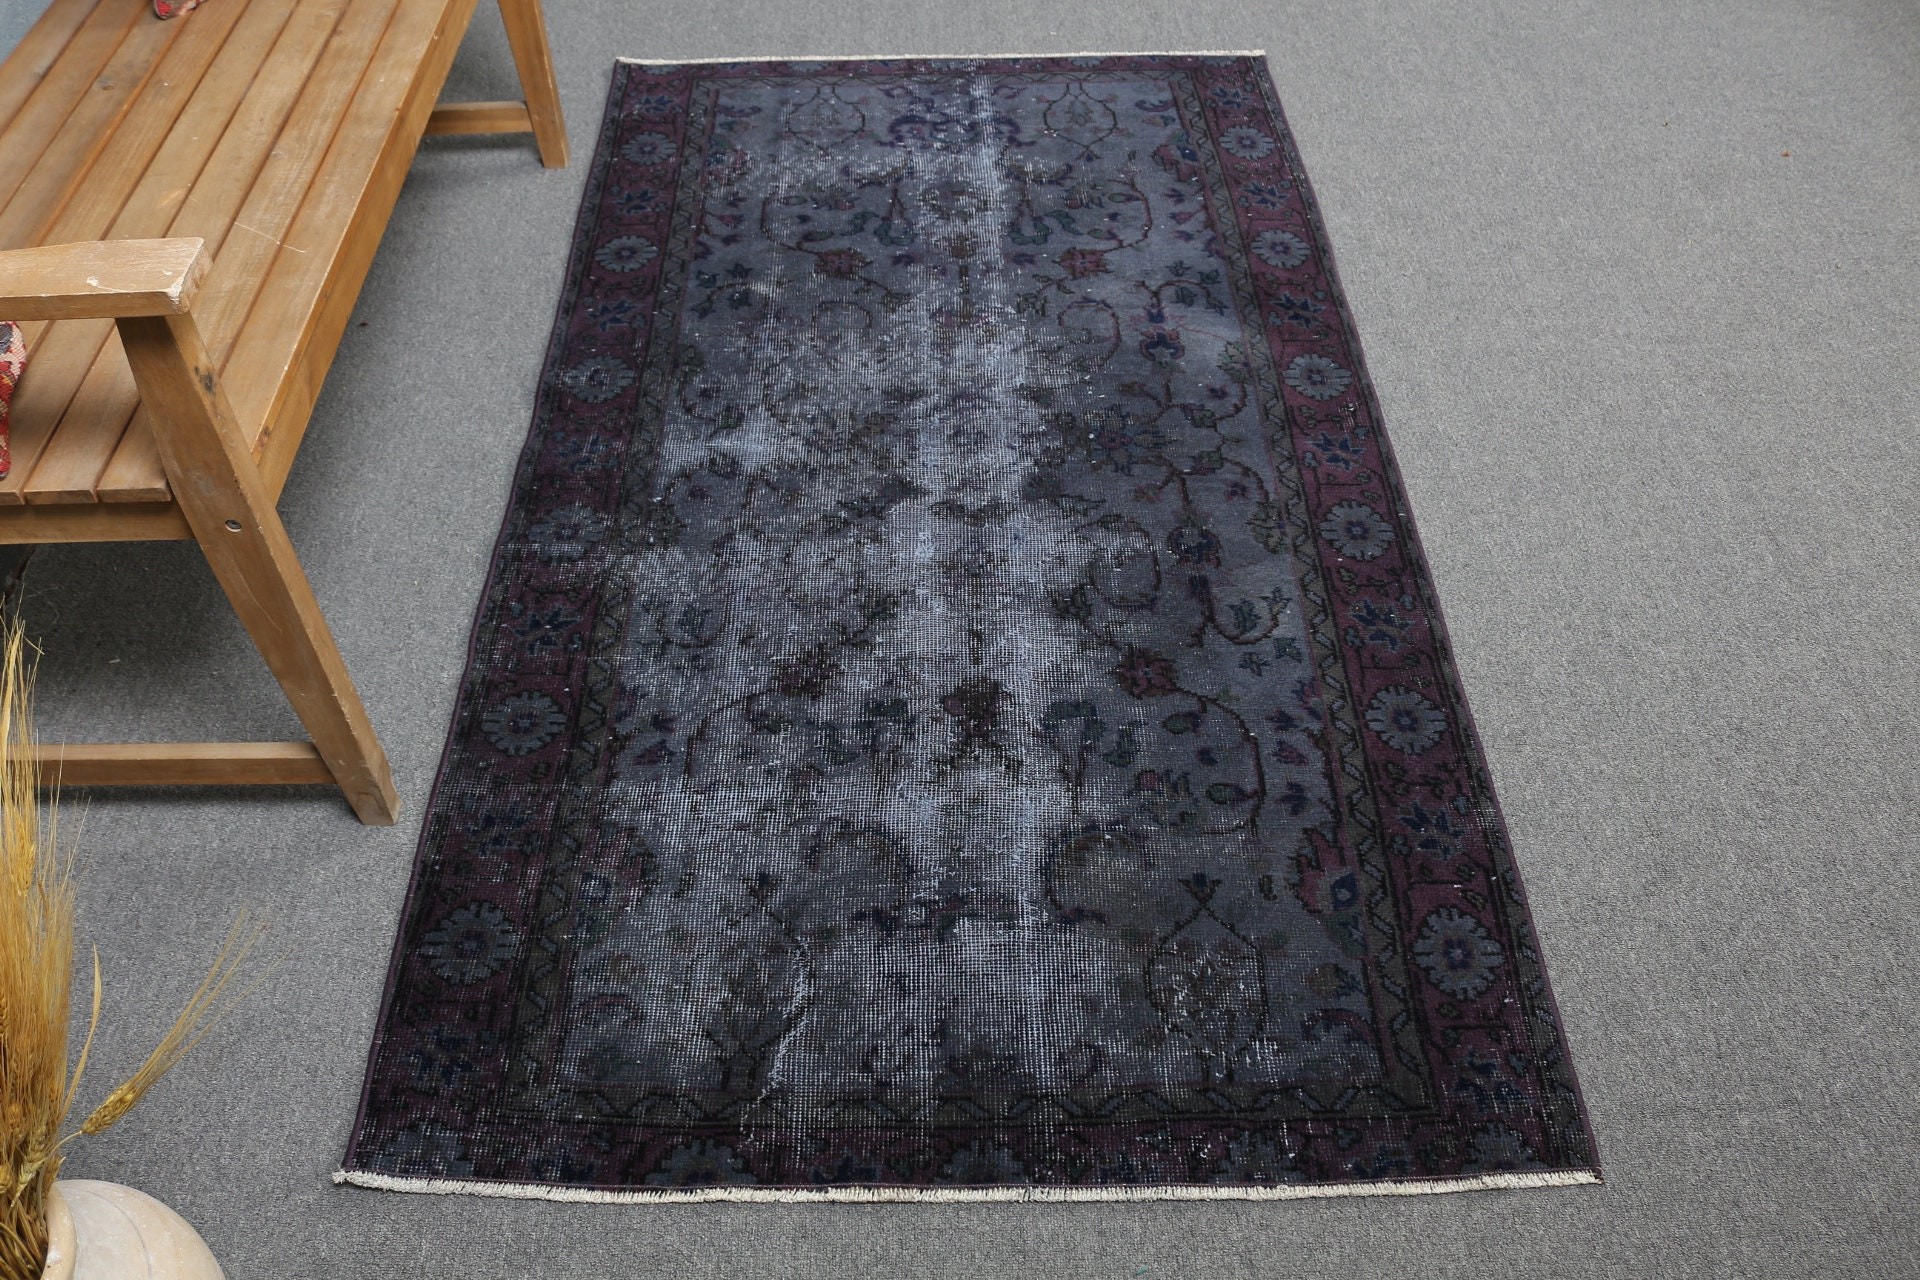 Rugs for Bedroom, 3.4x6.2 ft Accent Rug, Vintage Rugs, Cool Rug, Home Decor Rug, Turkish Rug, Gray Bedroom Rugs, Kitchen Rugs, Entry Rugs